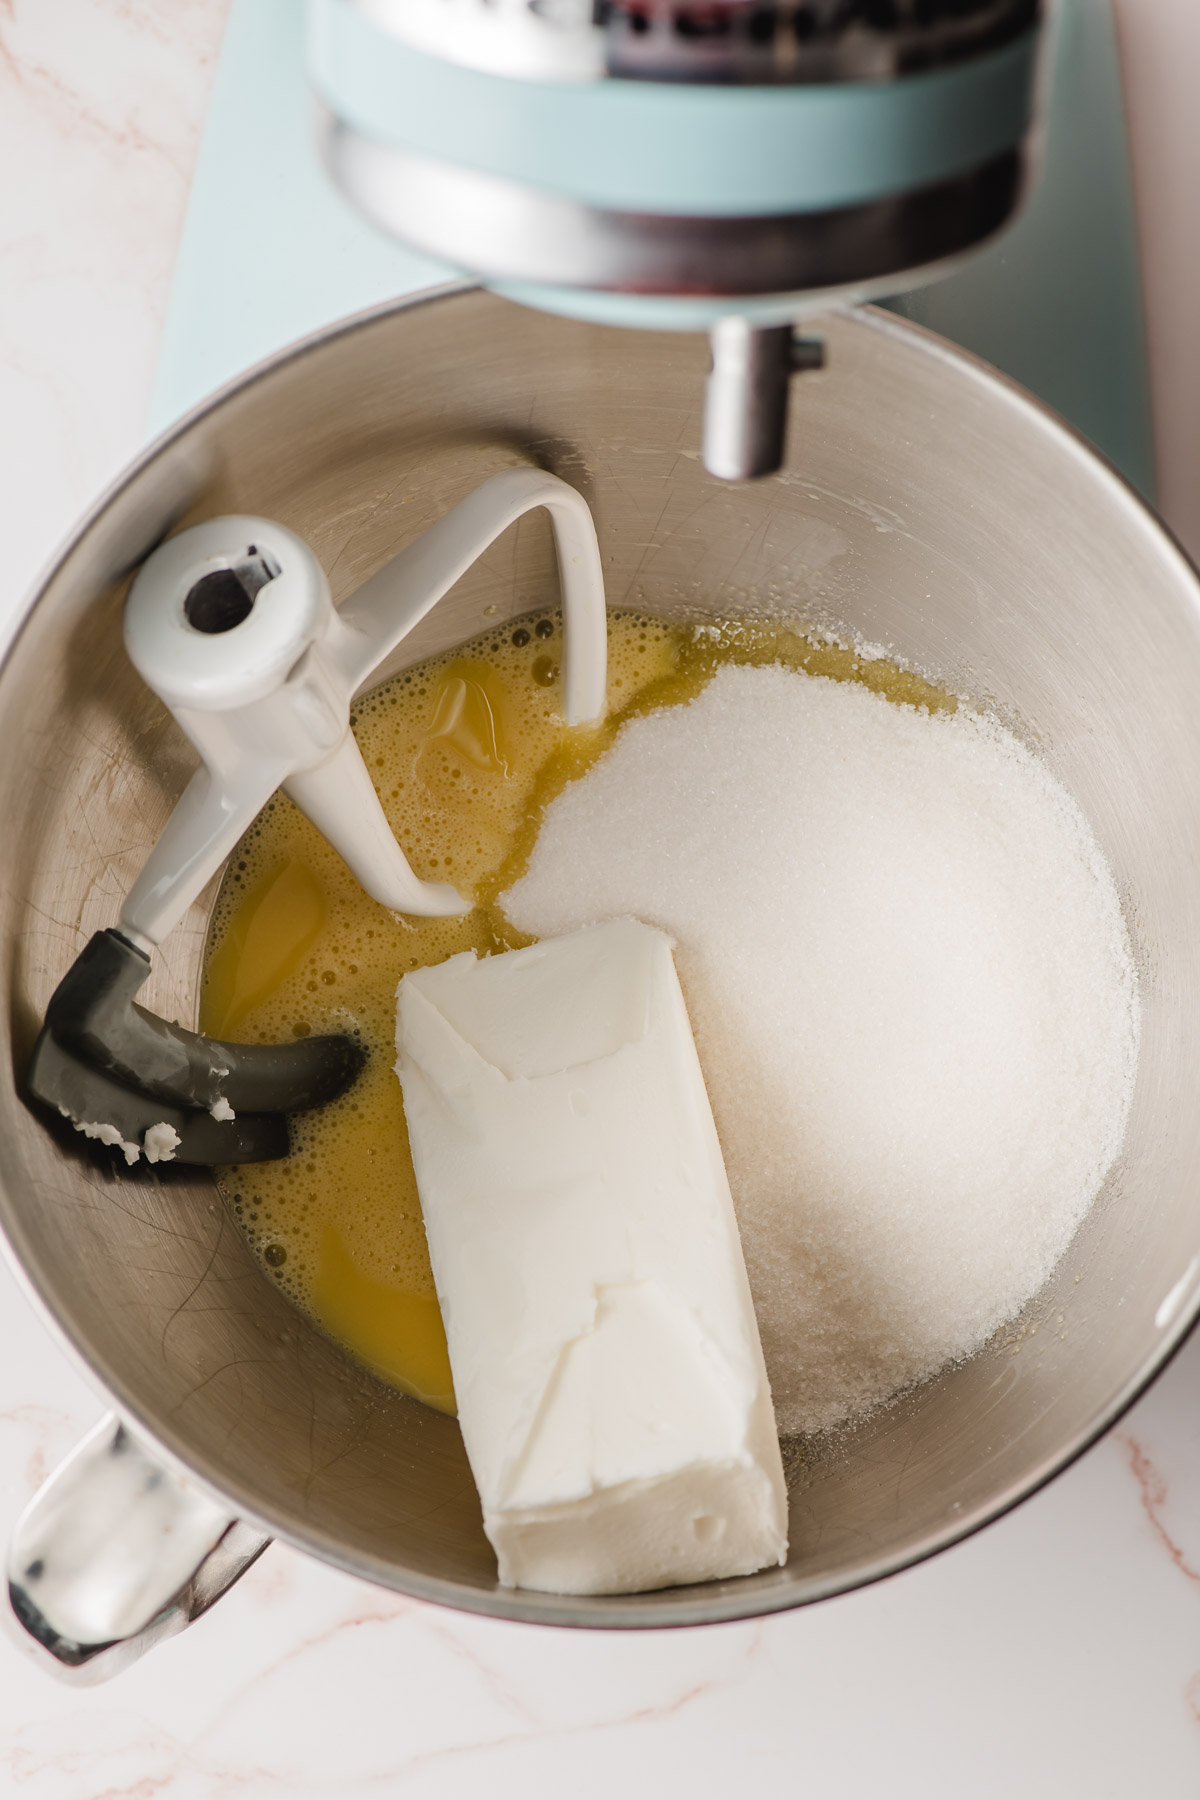 Shortening, sugar, and eggs in the bowl of an electric mixer.